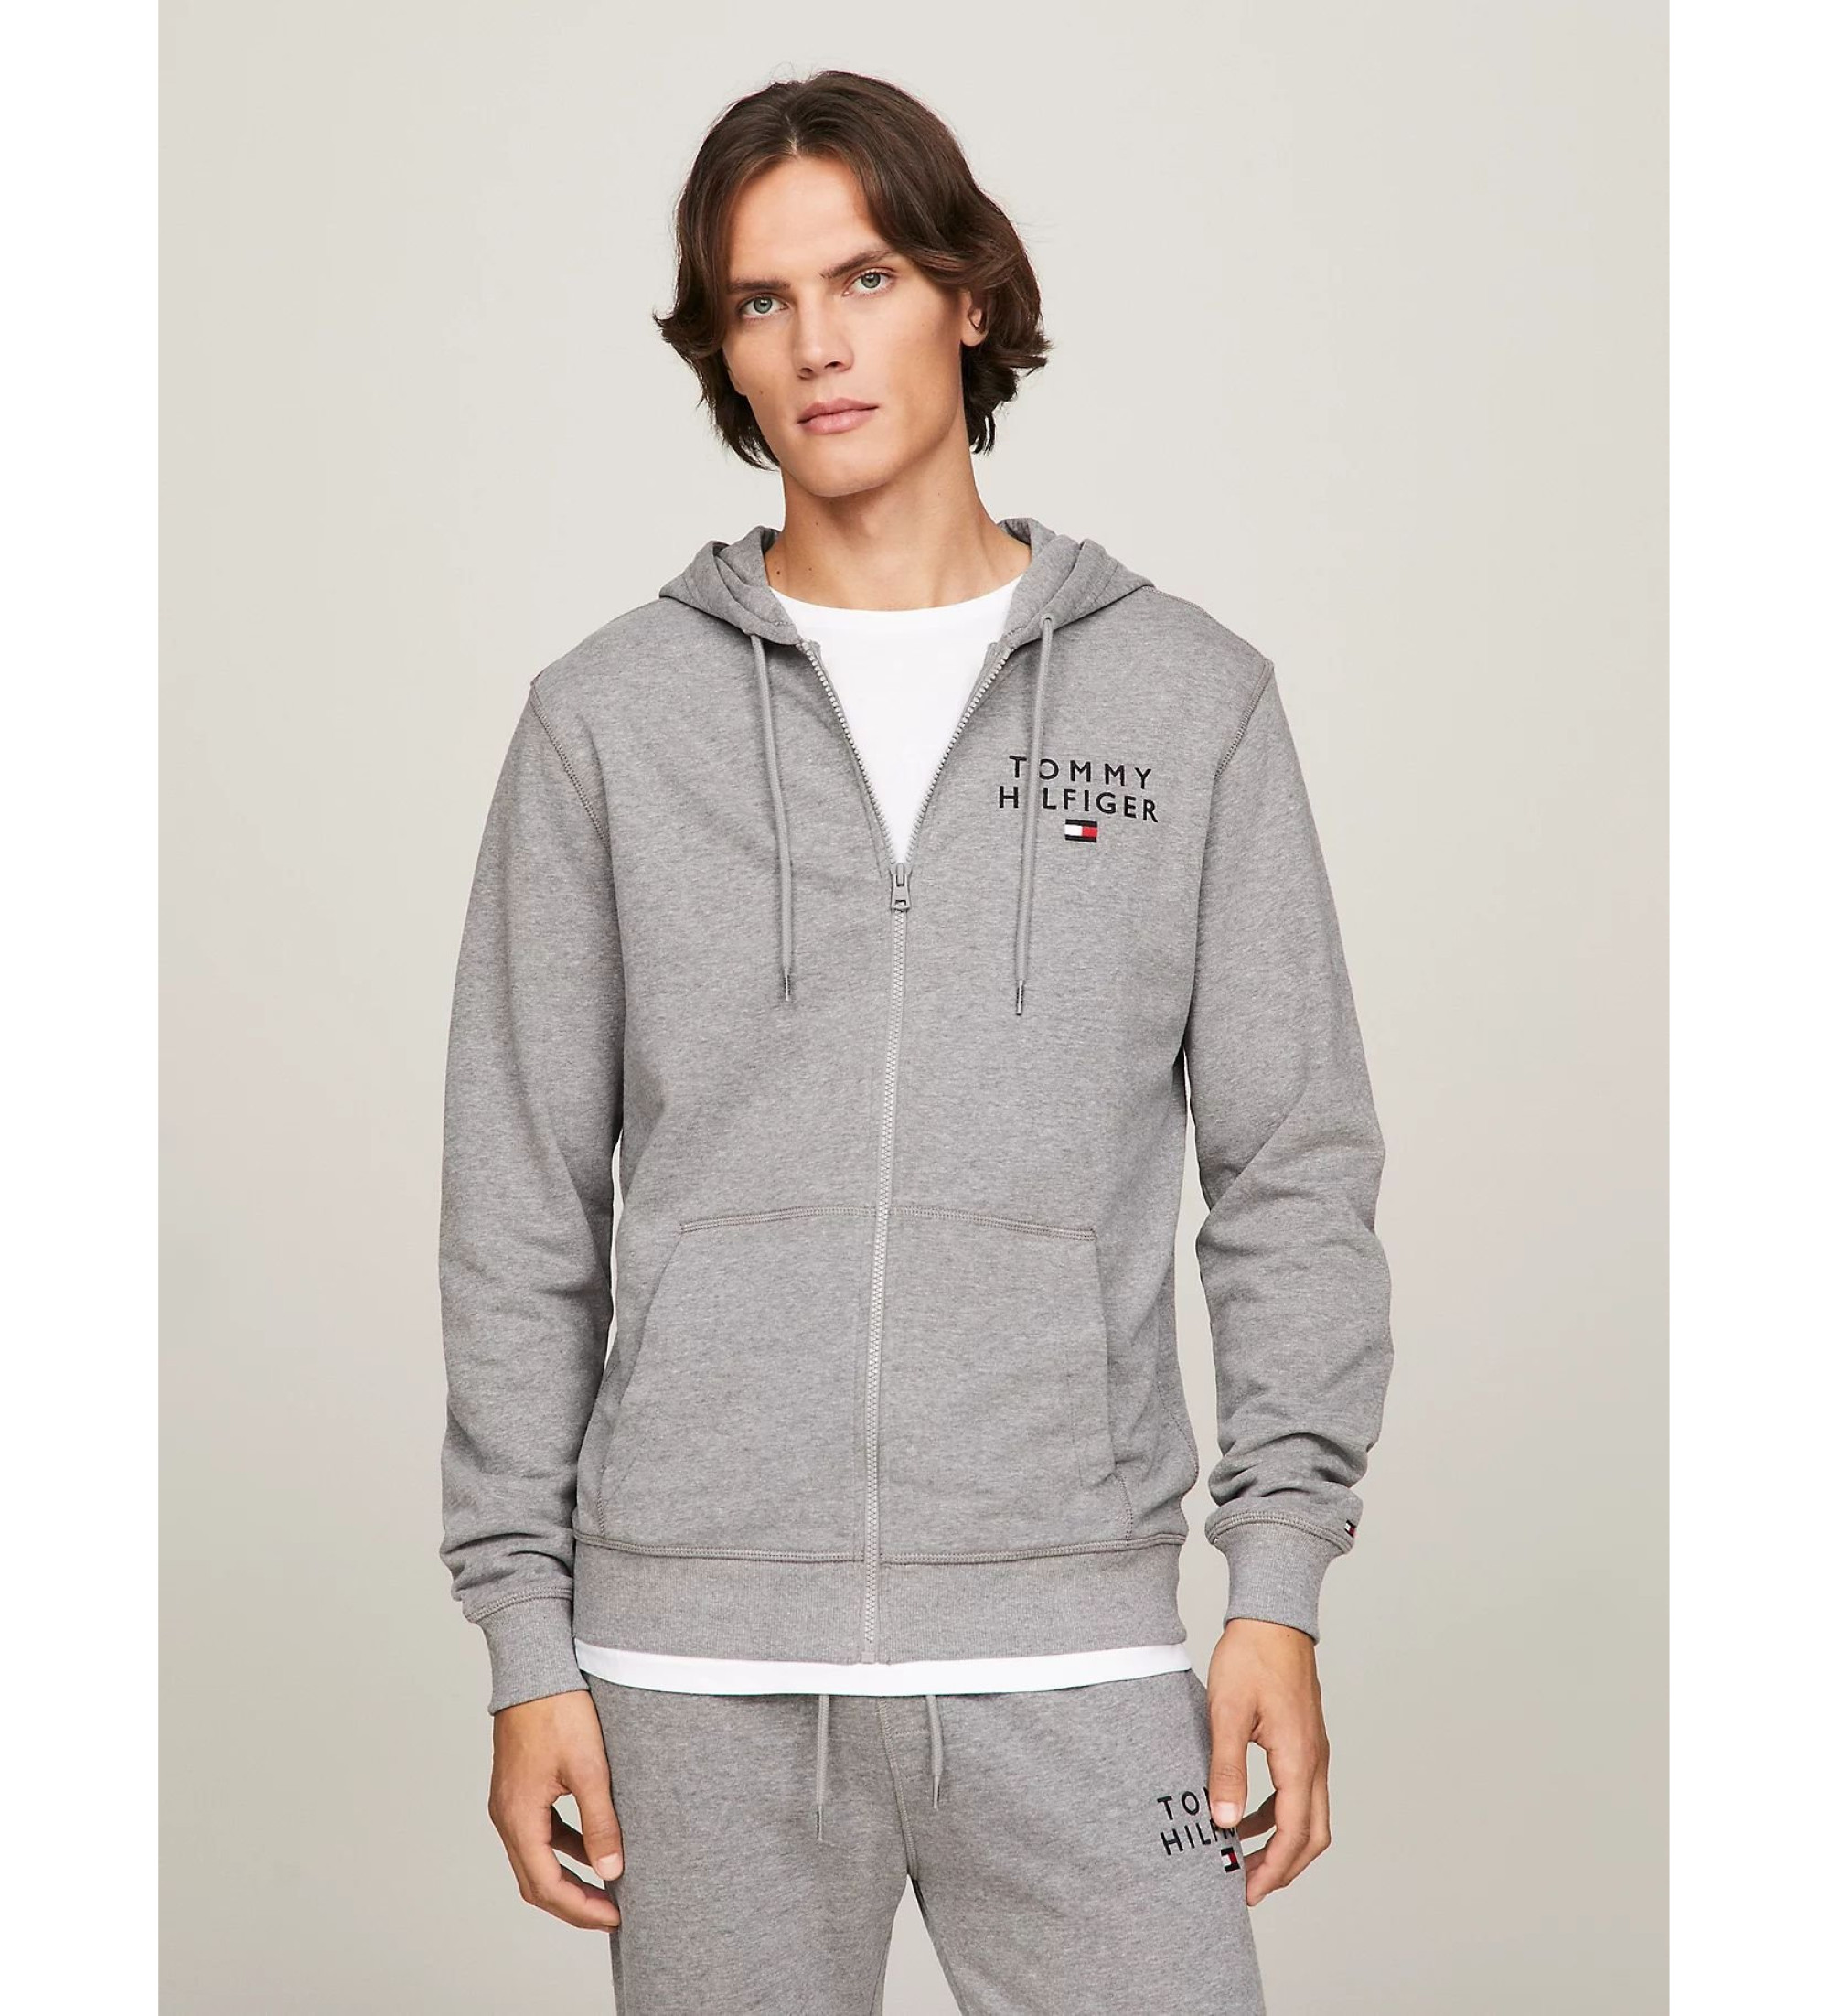 Tommy Hilfiger Hooded with Logo grey ESD Store fashion, footwear accessories - best shoes and designer shoes